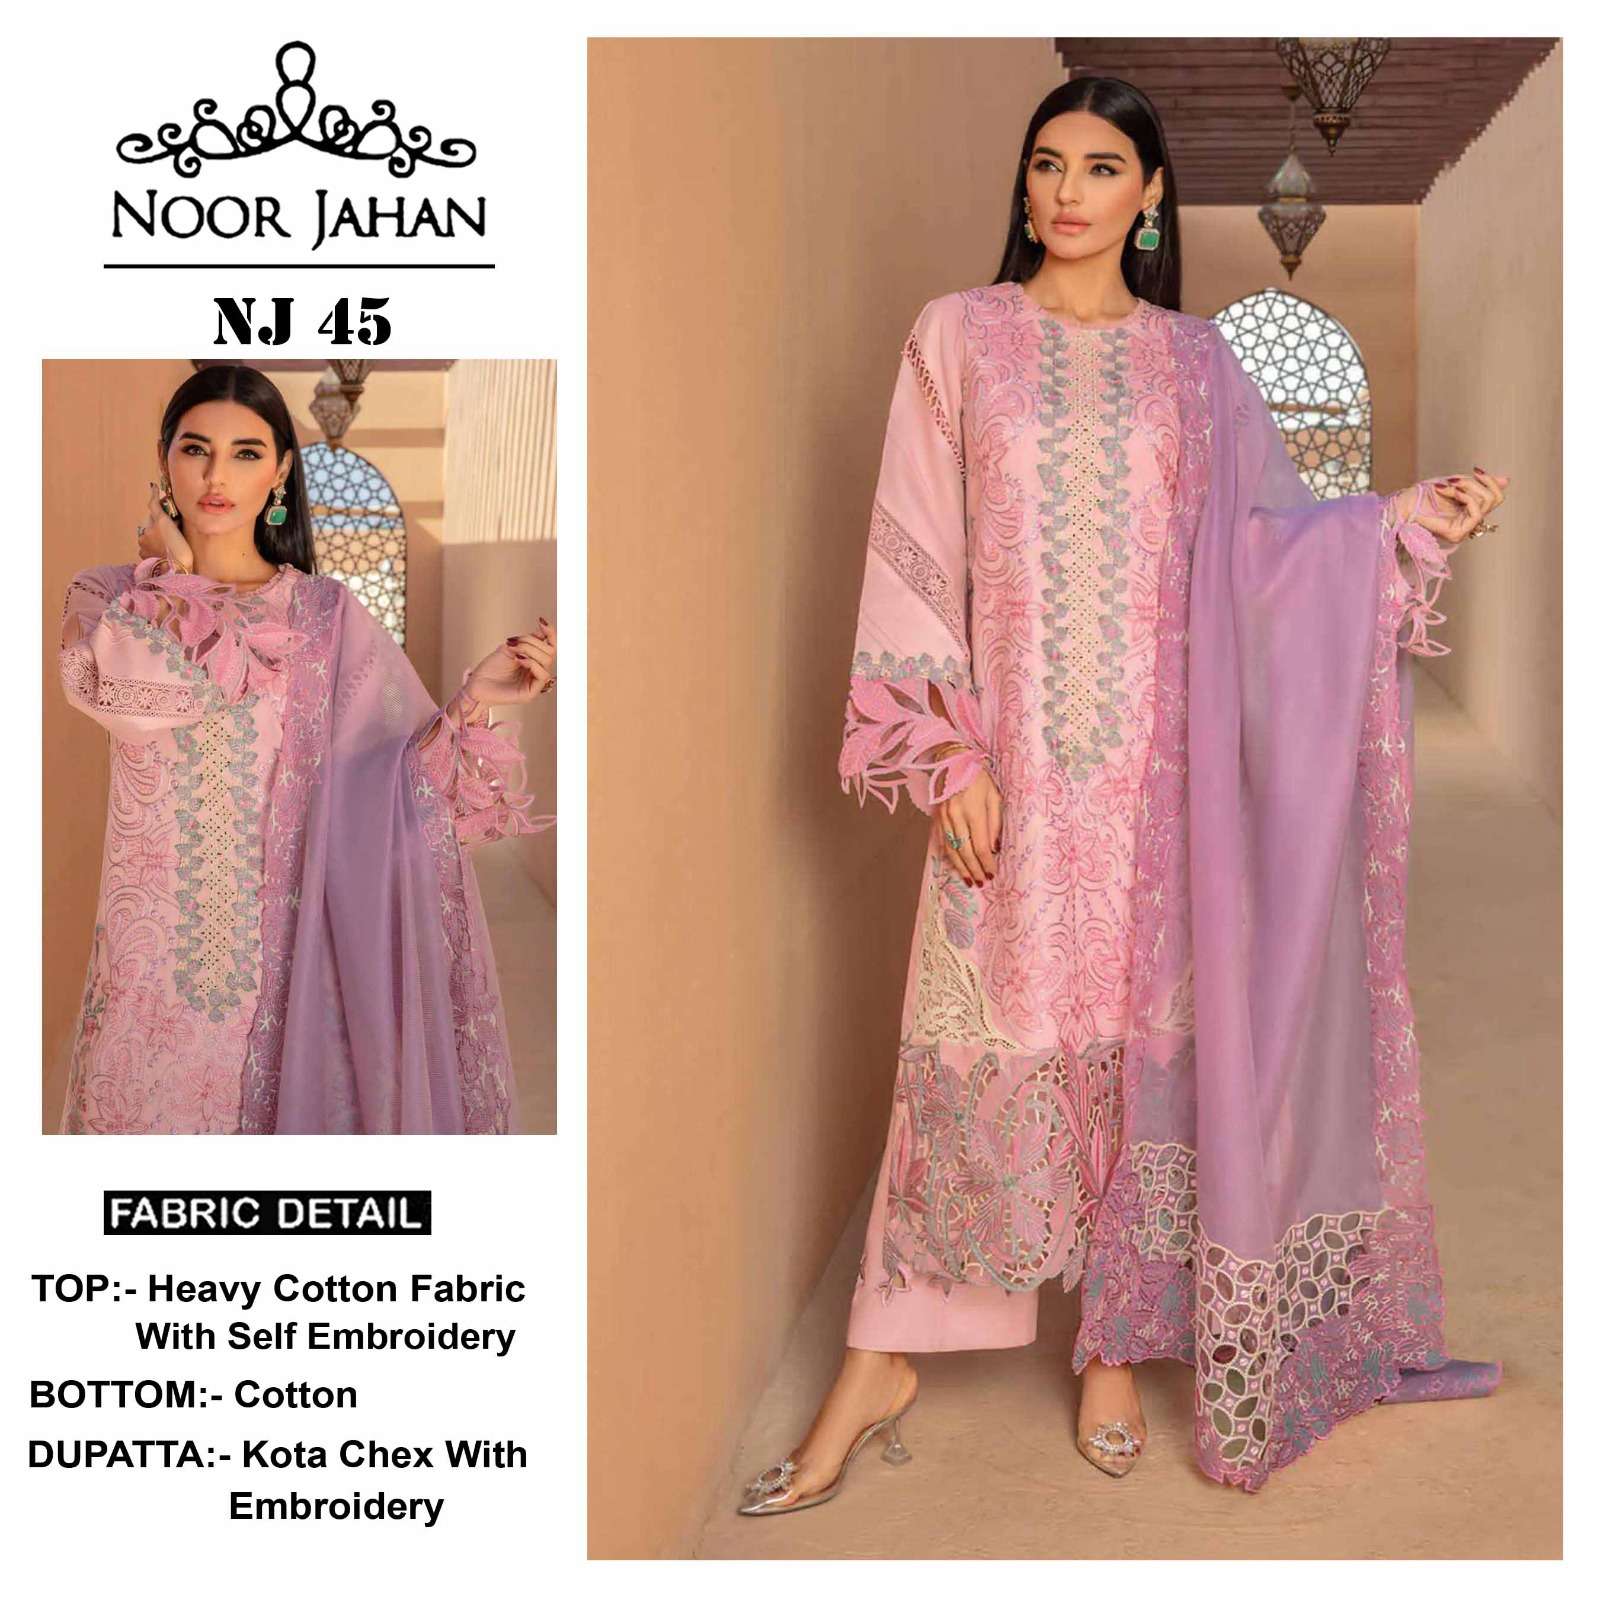 NJ-45 BY NOOR JAHAN DESIGNER CAMBRIC COTTON EMBROIDERY PAKISTANI DRESS